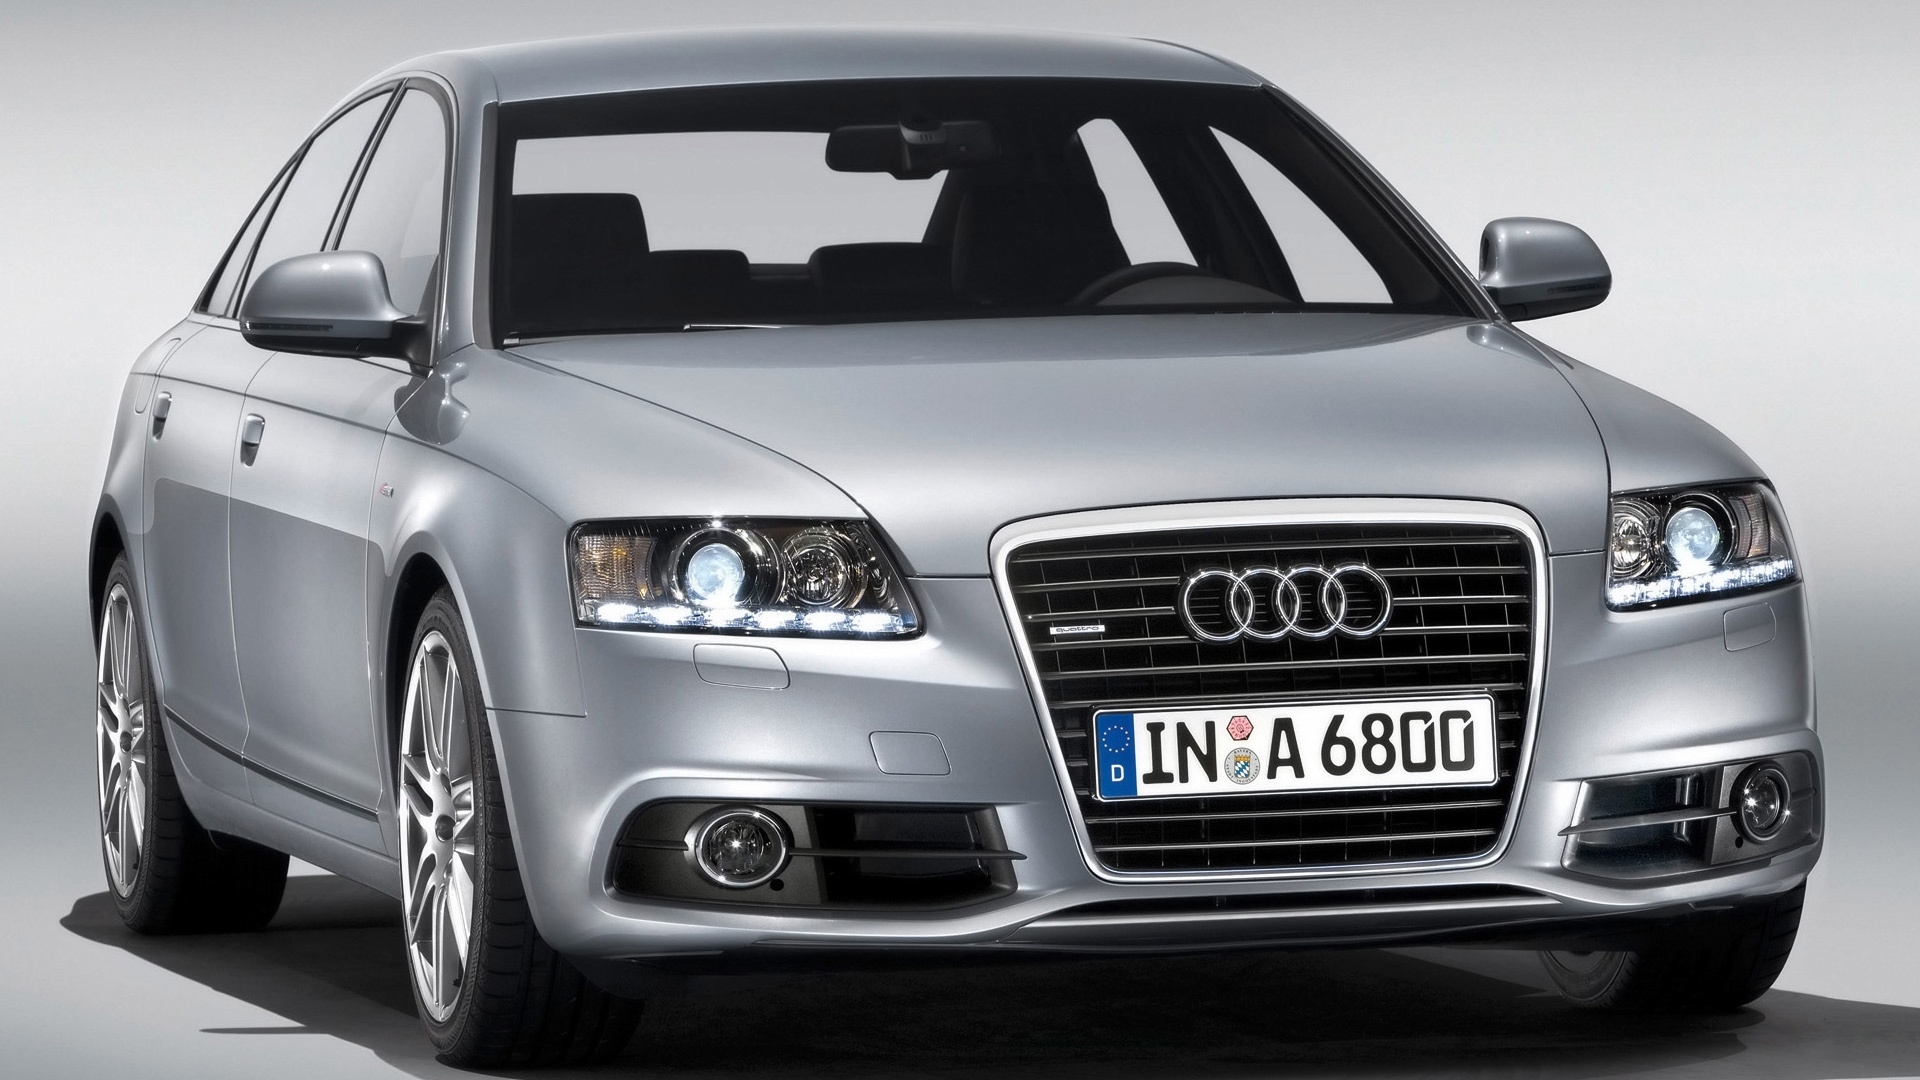 2009 Audi A6 - Rear And Side for 1920 x 1080 HDTV 1080p resolution